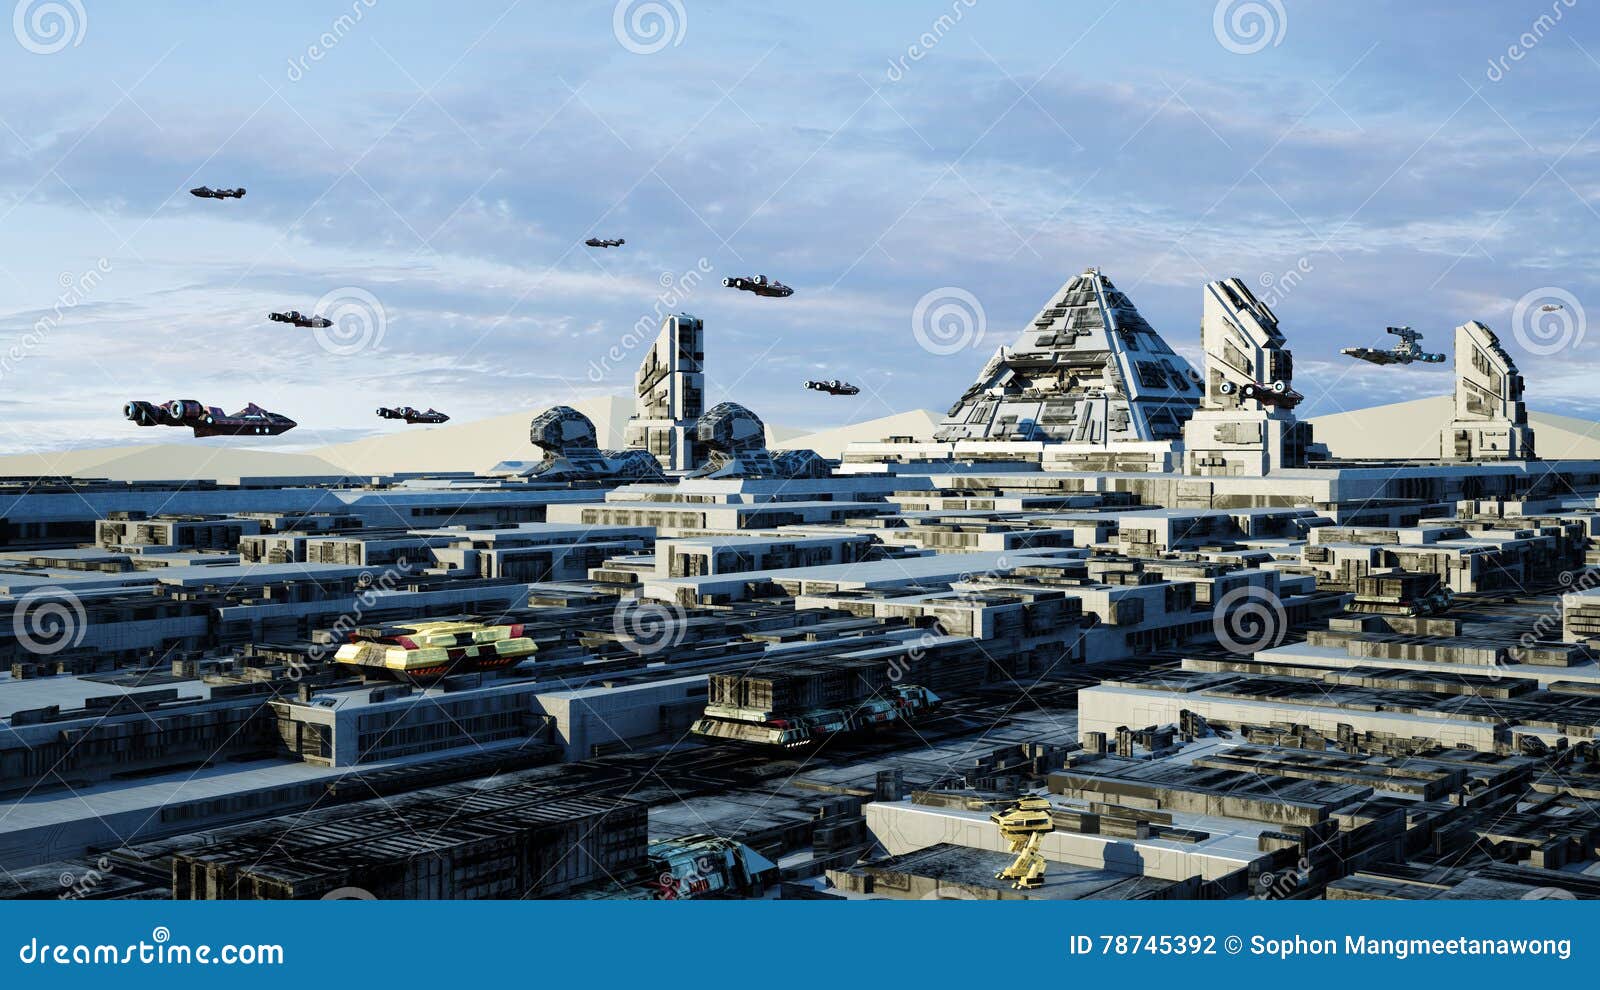 concept cairo egypt scifi cityscape transport airship from the future